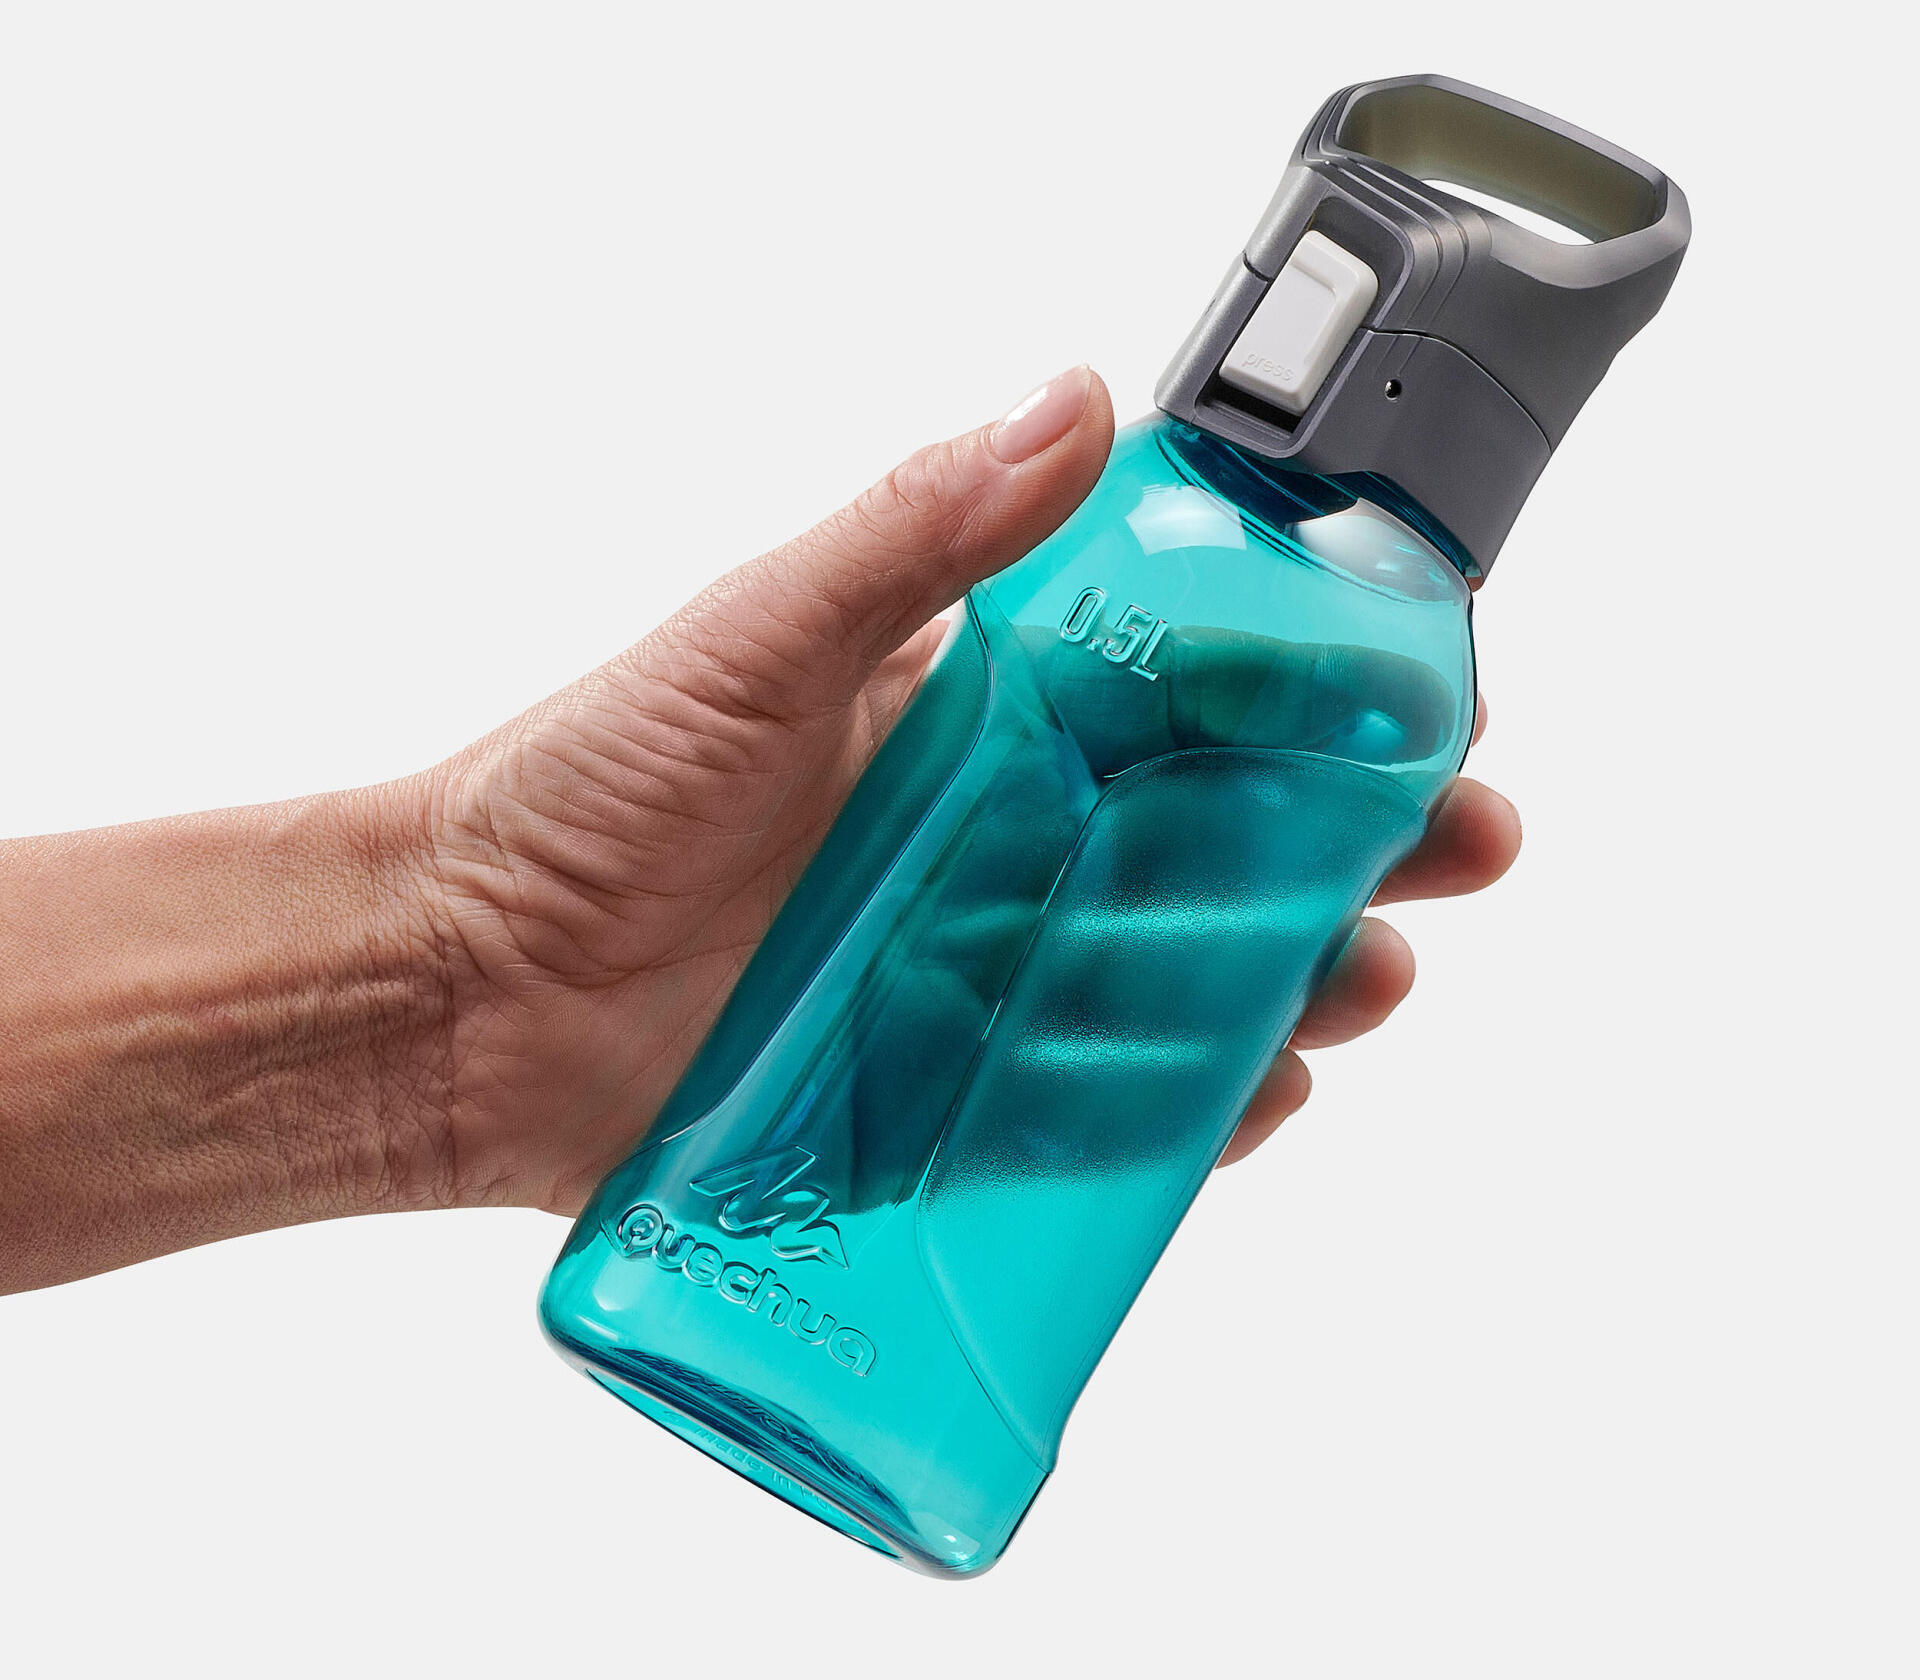 How to choose a hiking water bottle?